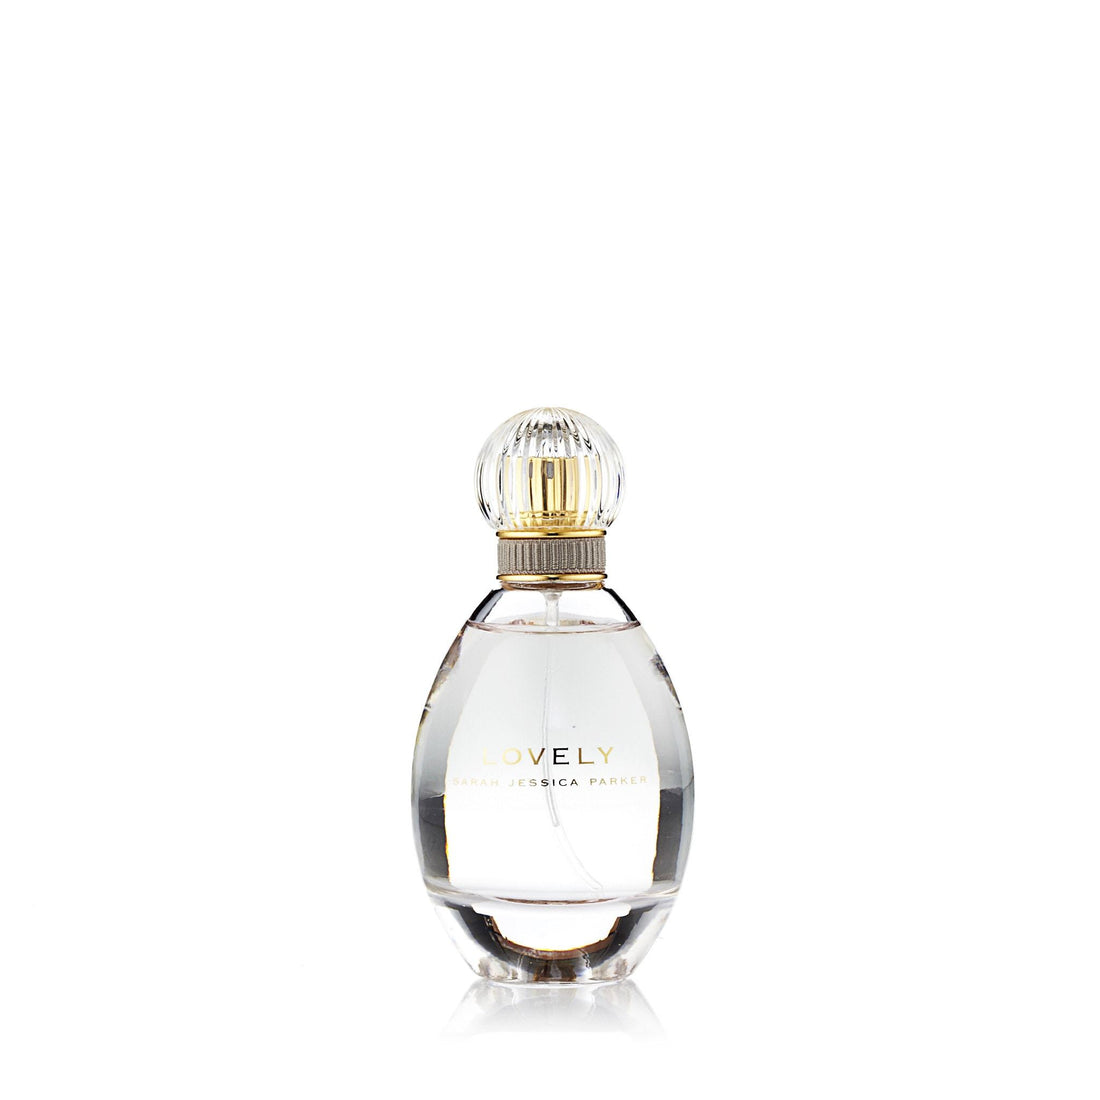 Lovely EDP for Women by Sarah Jessica Parker – Fragrance Outlet